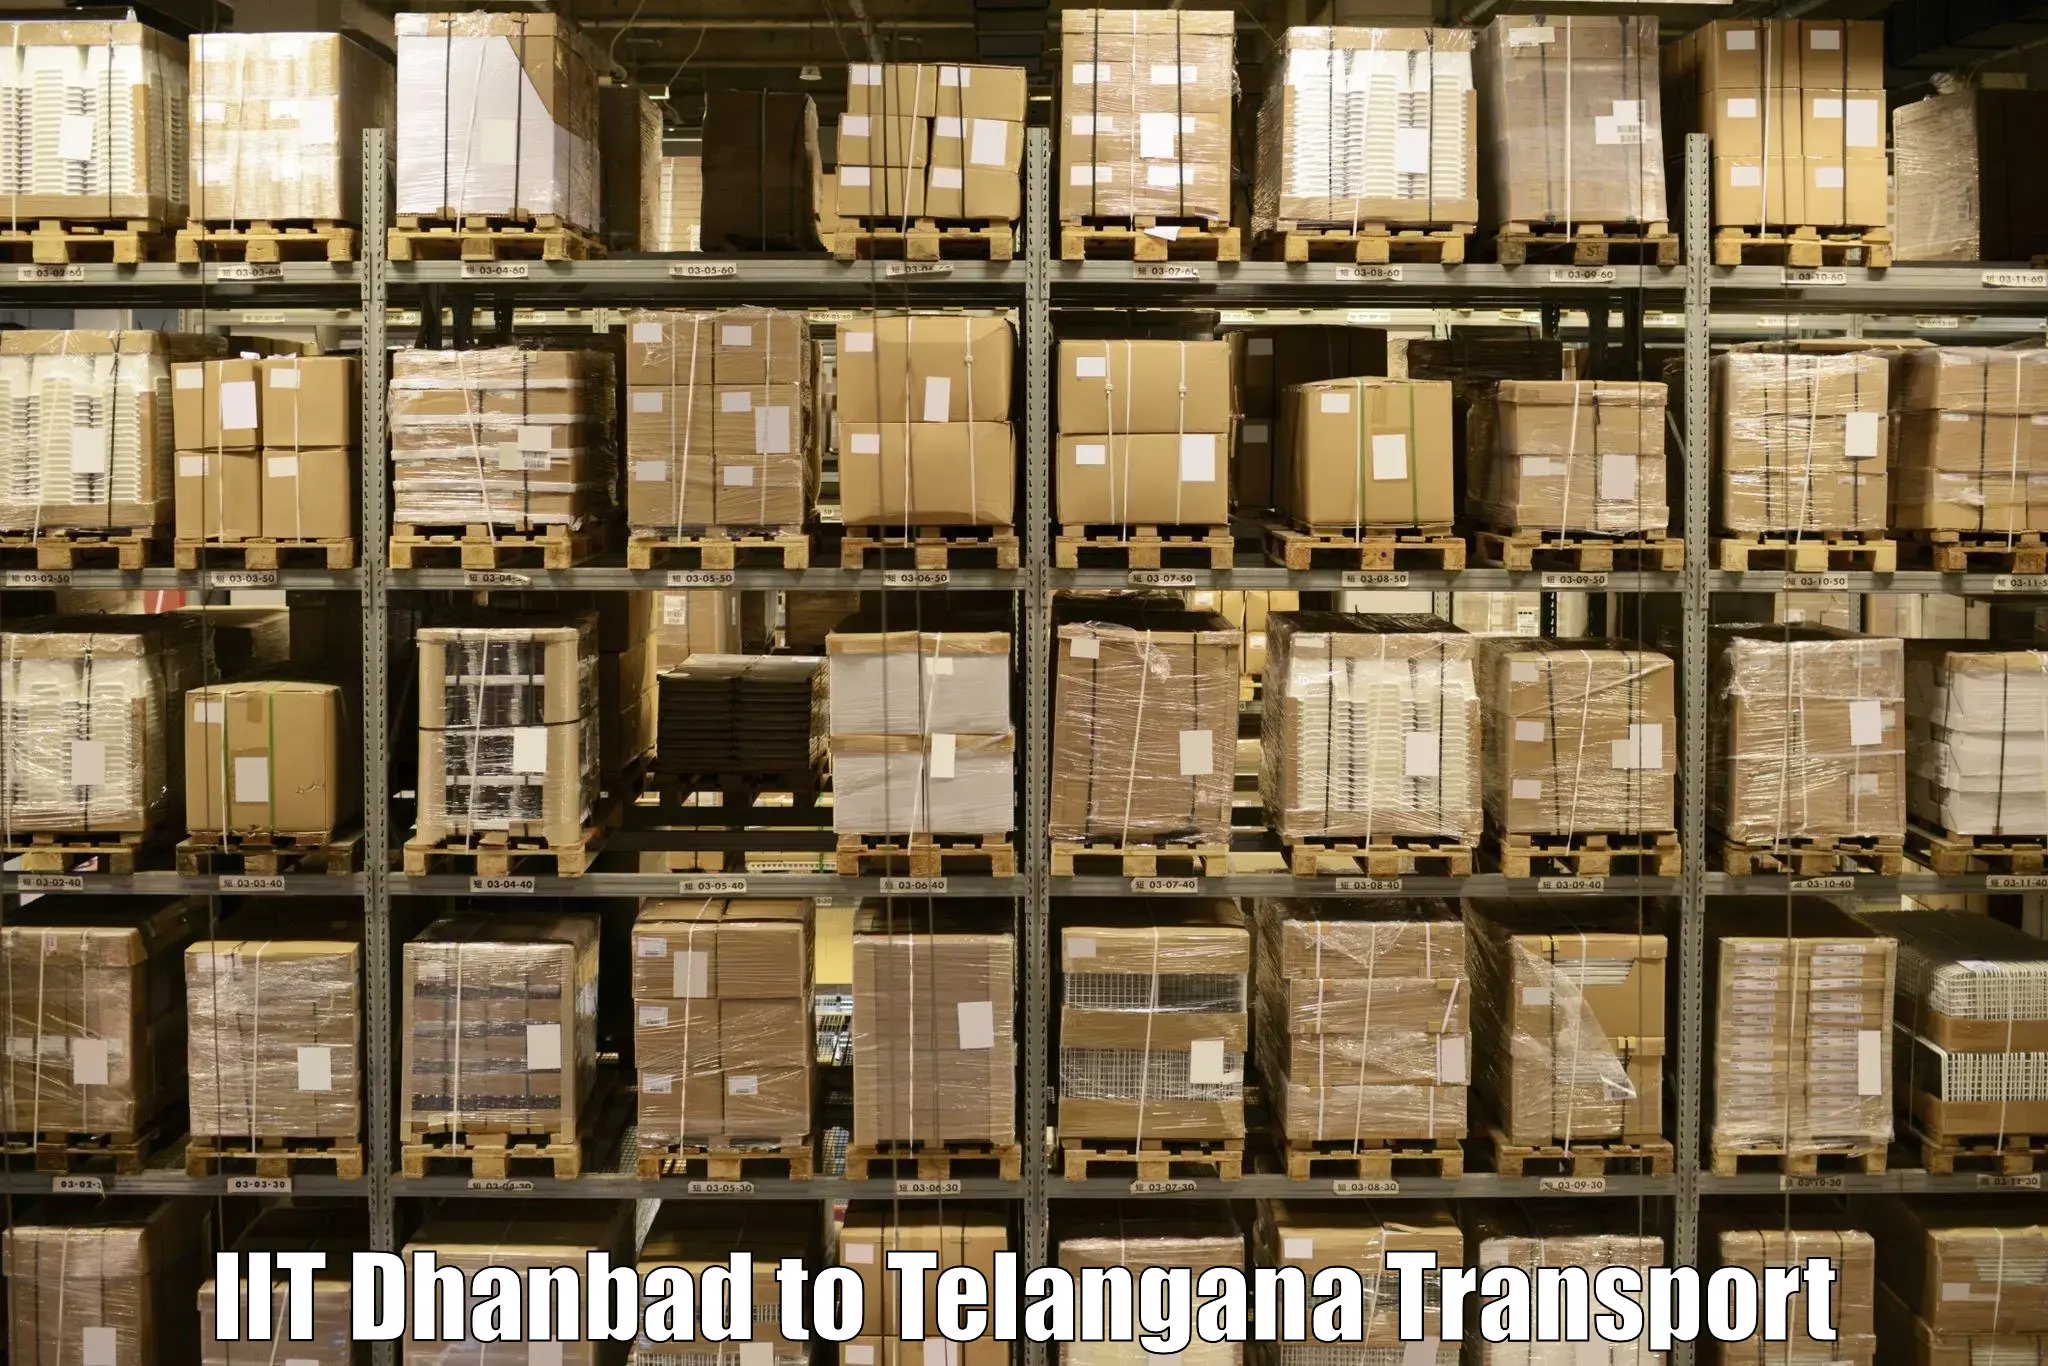 Truck transport companies in India in IIT Dhanbad to Madhira